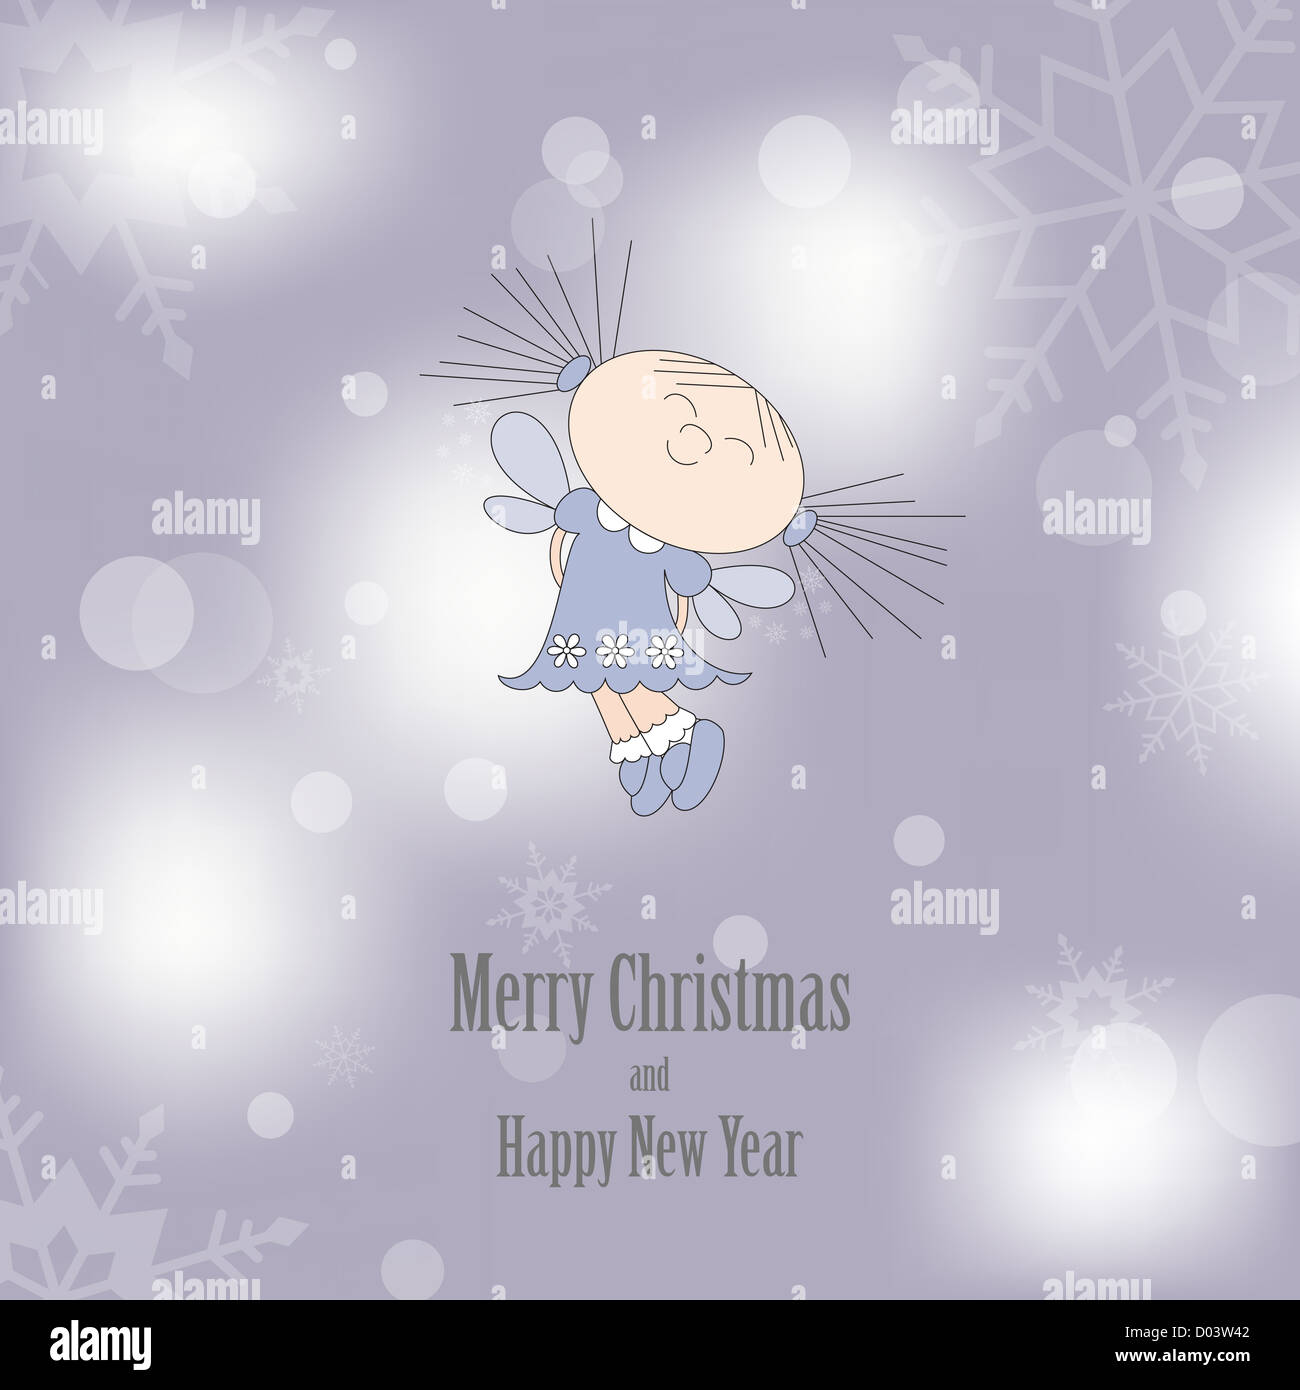 Christmas greeting card with dreaming girl Stock Photo